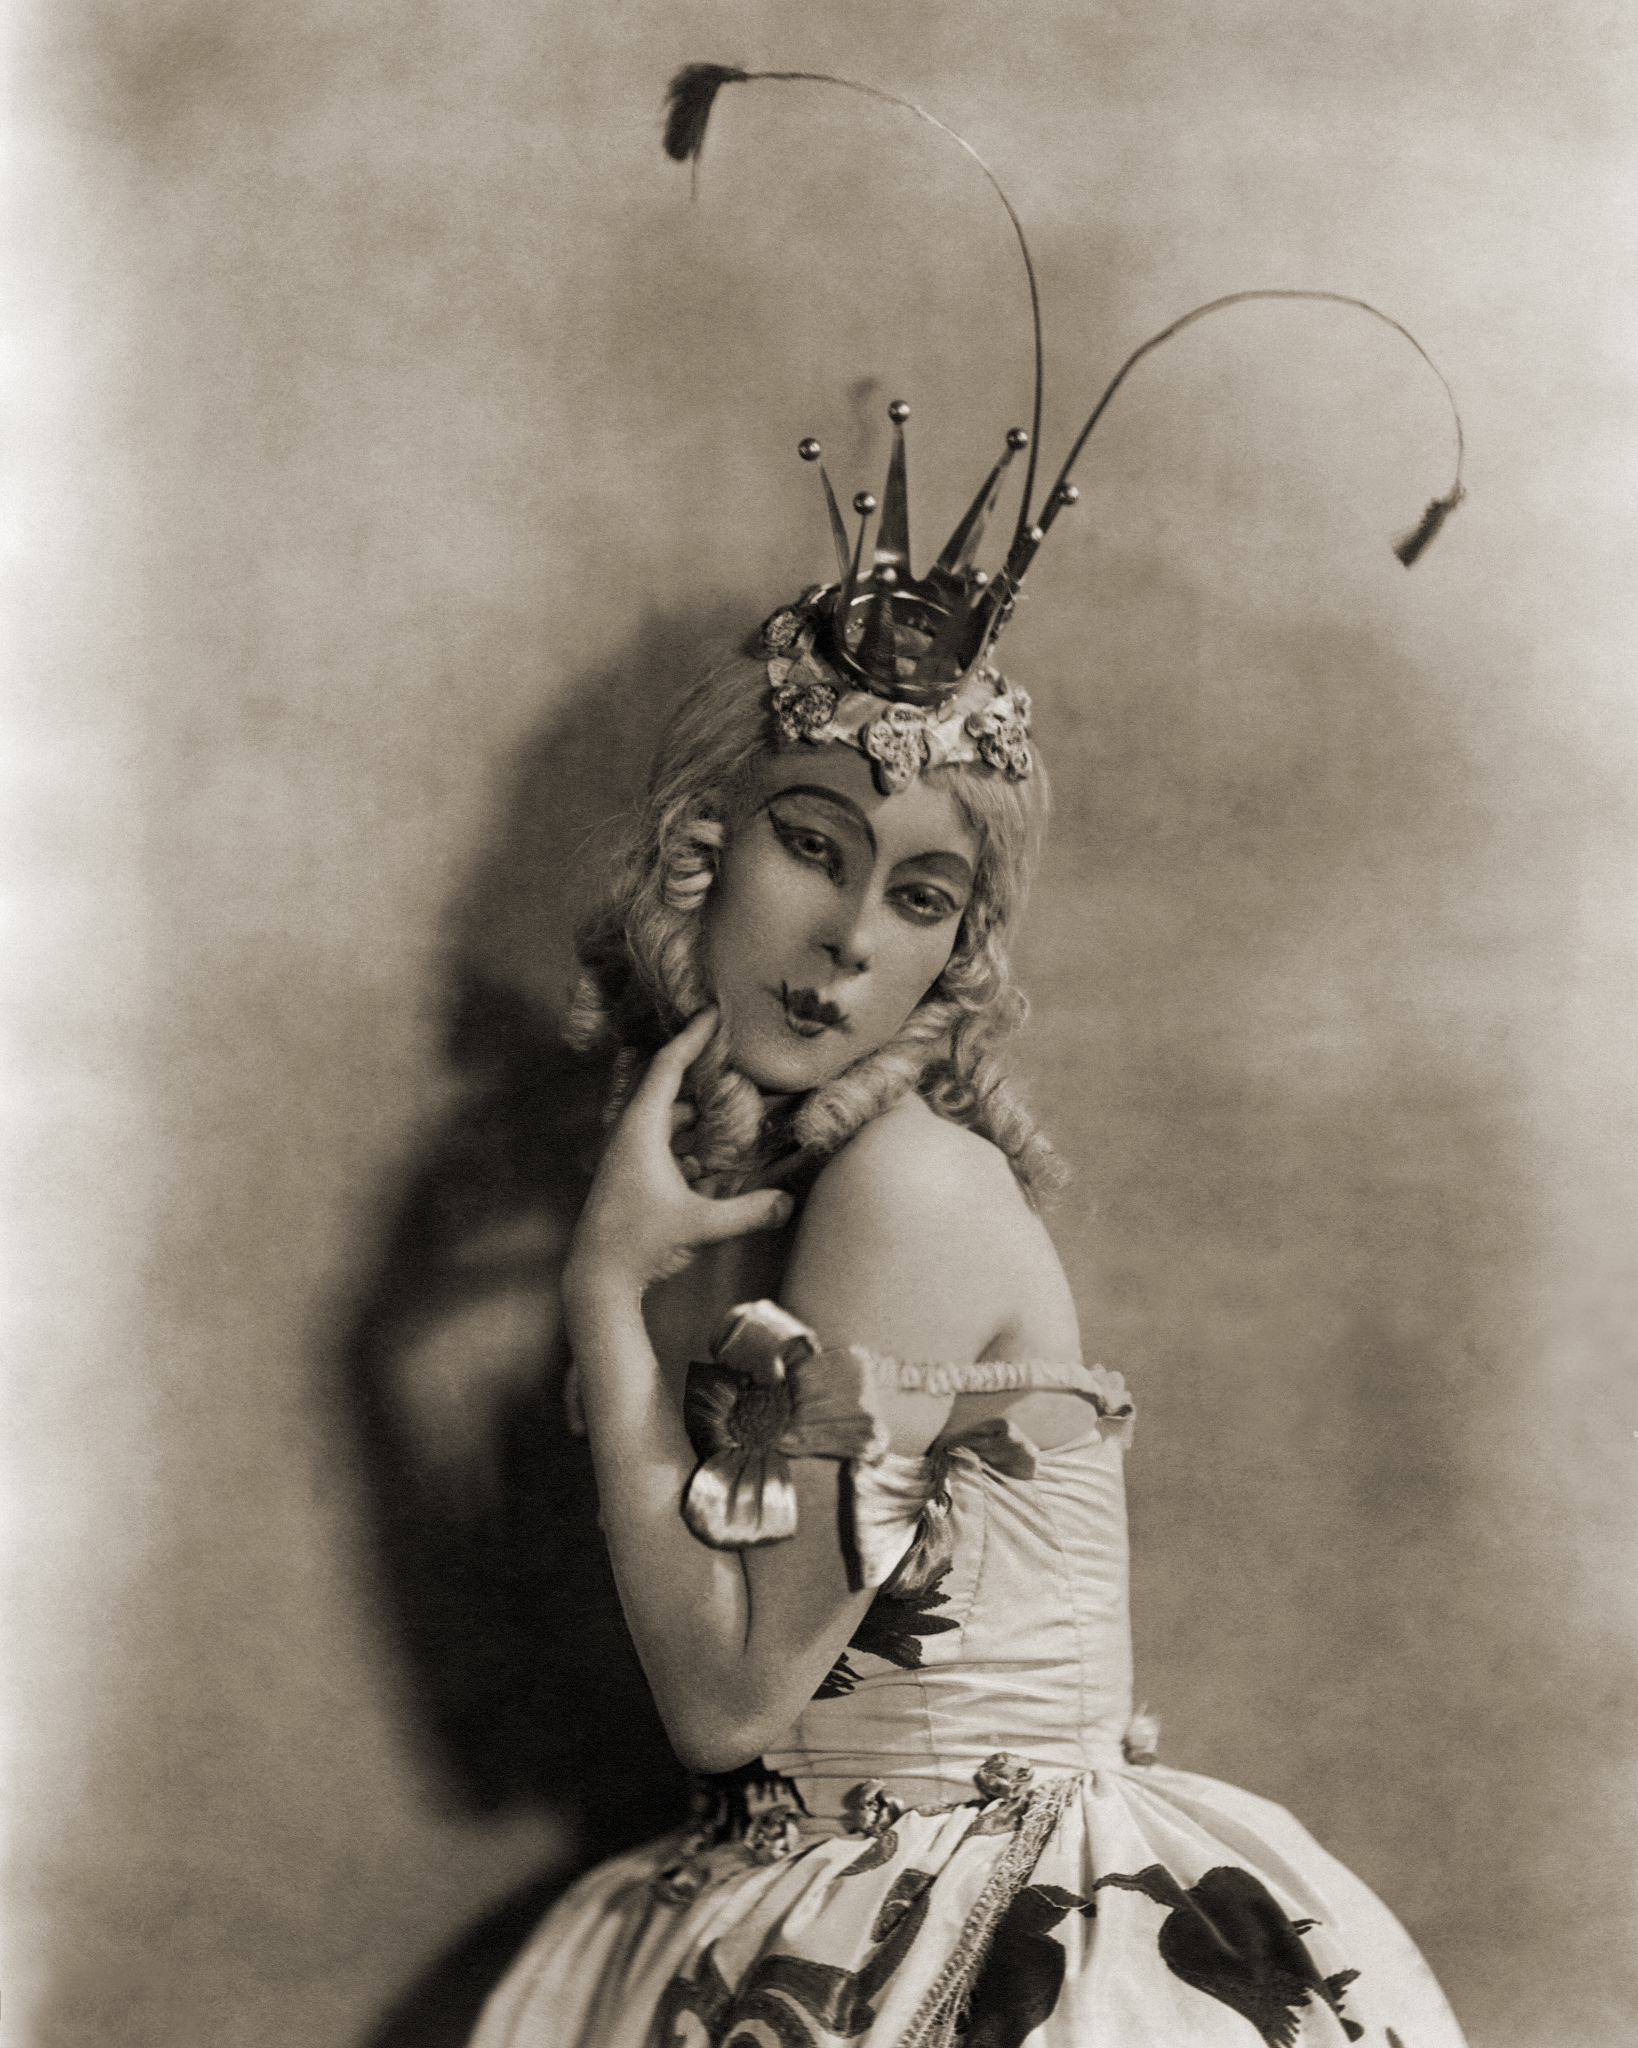 Bronislava Nijinska dressed in costume with a crown / tiara and flower-detailed dress (Photo by Florence Vandamm/Conde Nast via Getty Images)